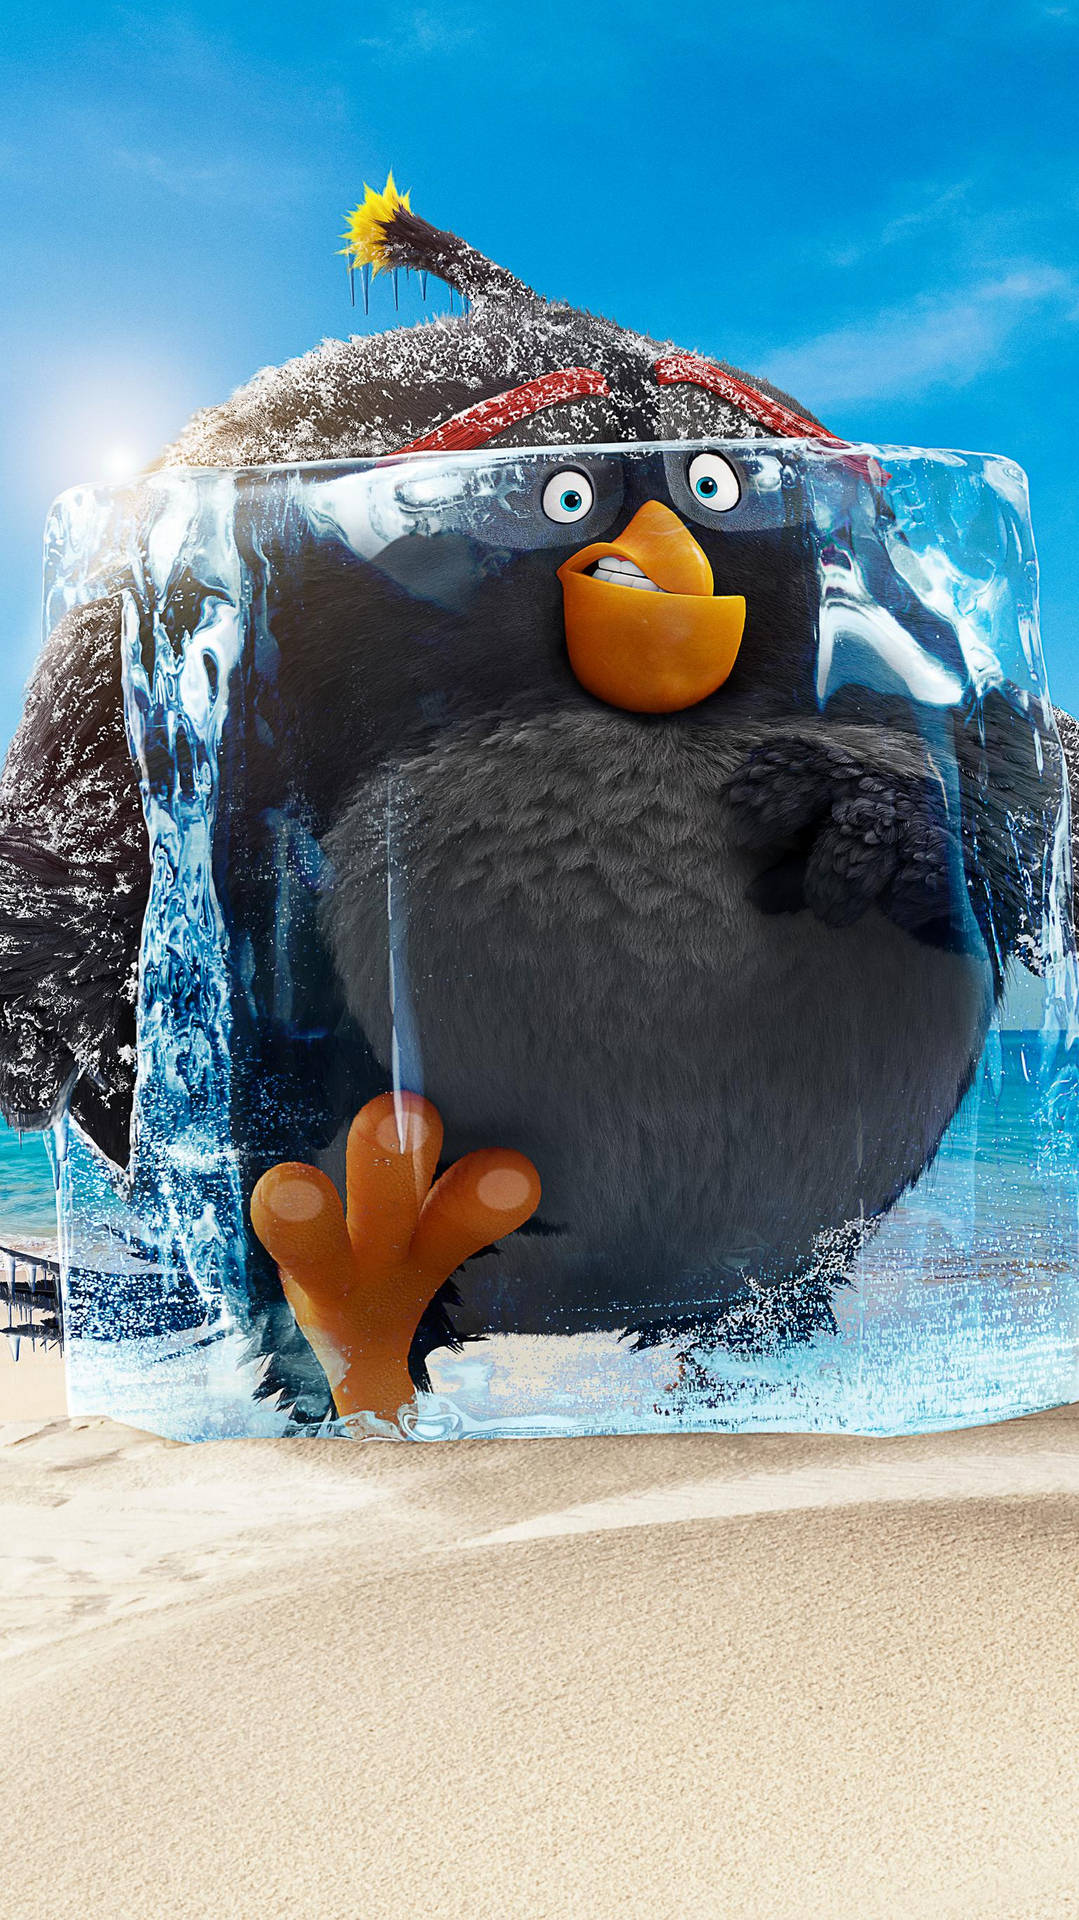 The Angry Birds Movie 2 Frozen Bomb Wallpaper